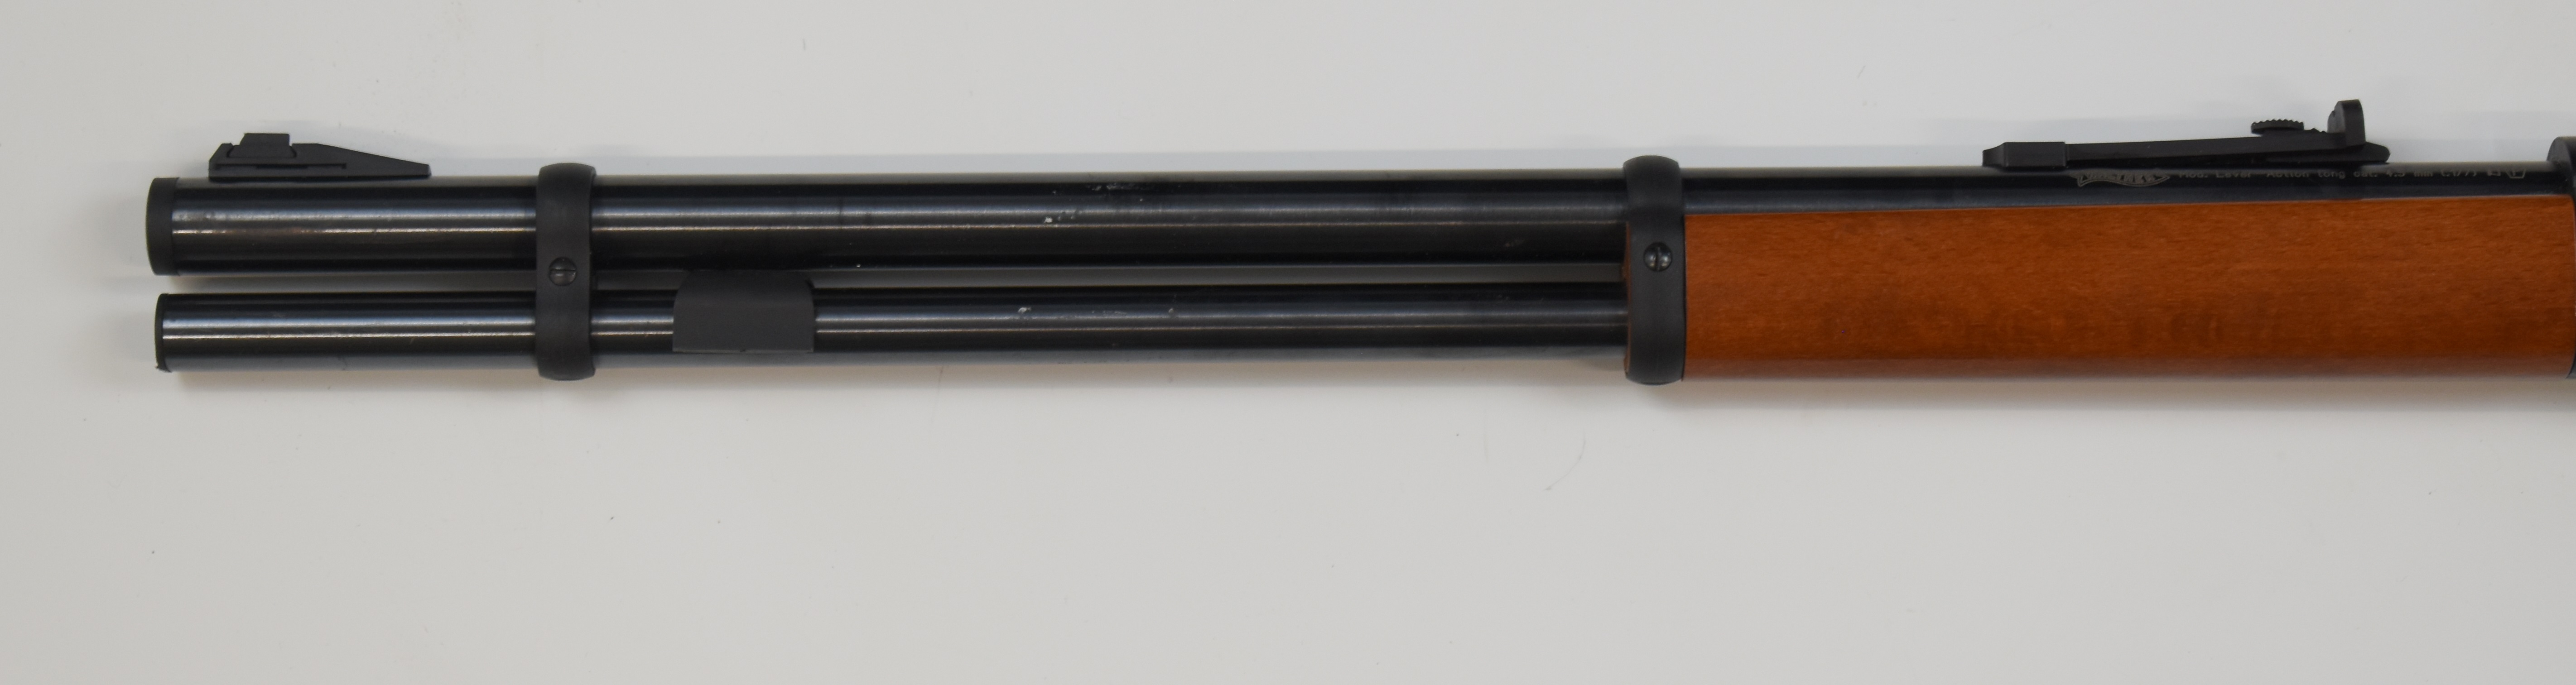 Walther Winchester style lever-action .177 CO2 carbine air rifle with two 8 shot magazines, - Image 9 of 11